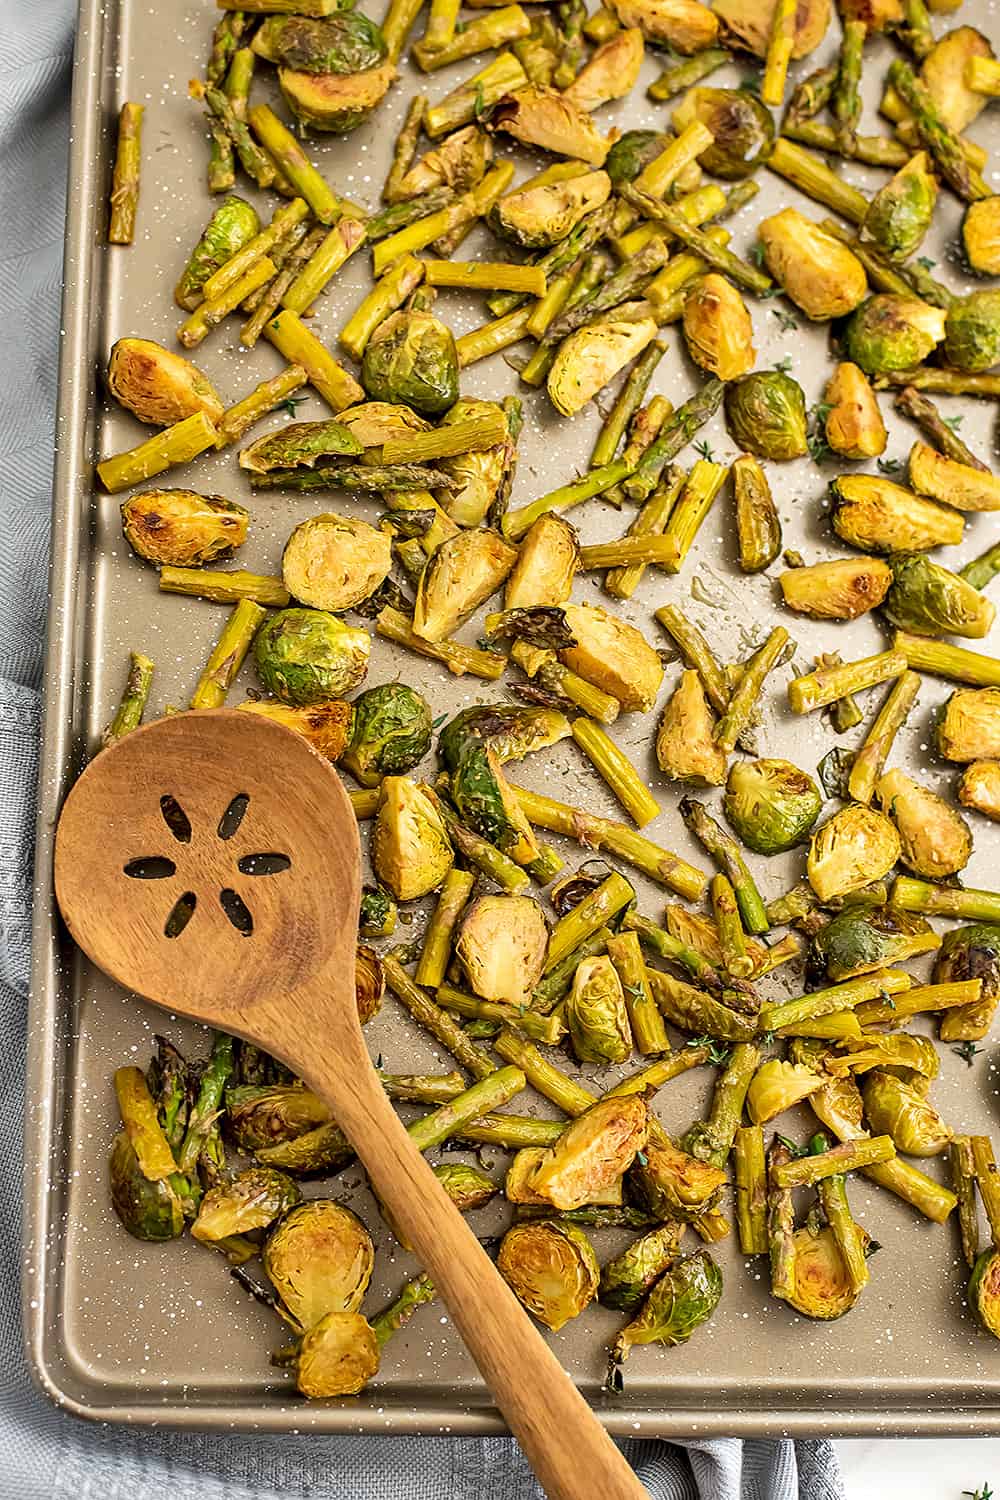 Wooden spoon on baking sheed with brussel sprouts and asparagus.